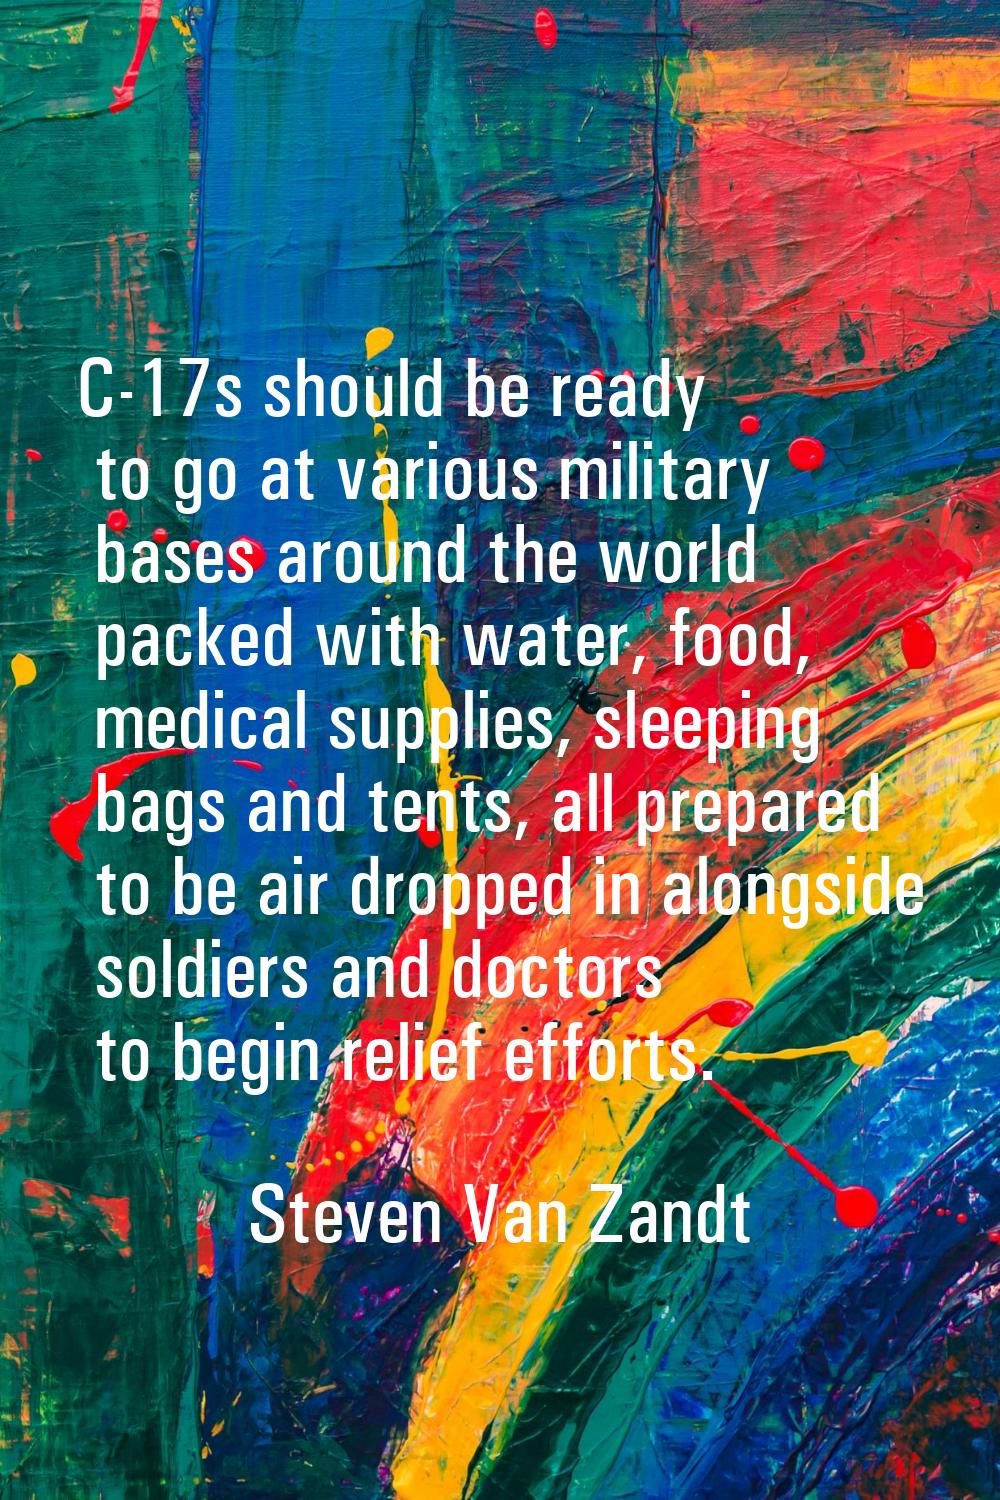 C-17s should be ready to go at various military bases around the world packed with water, food, med